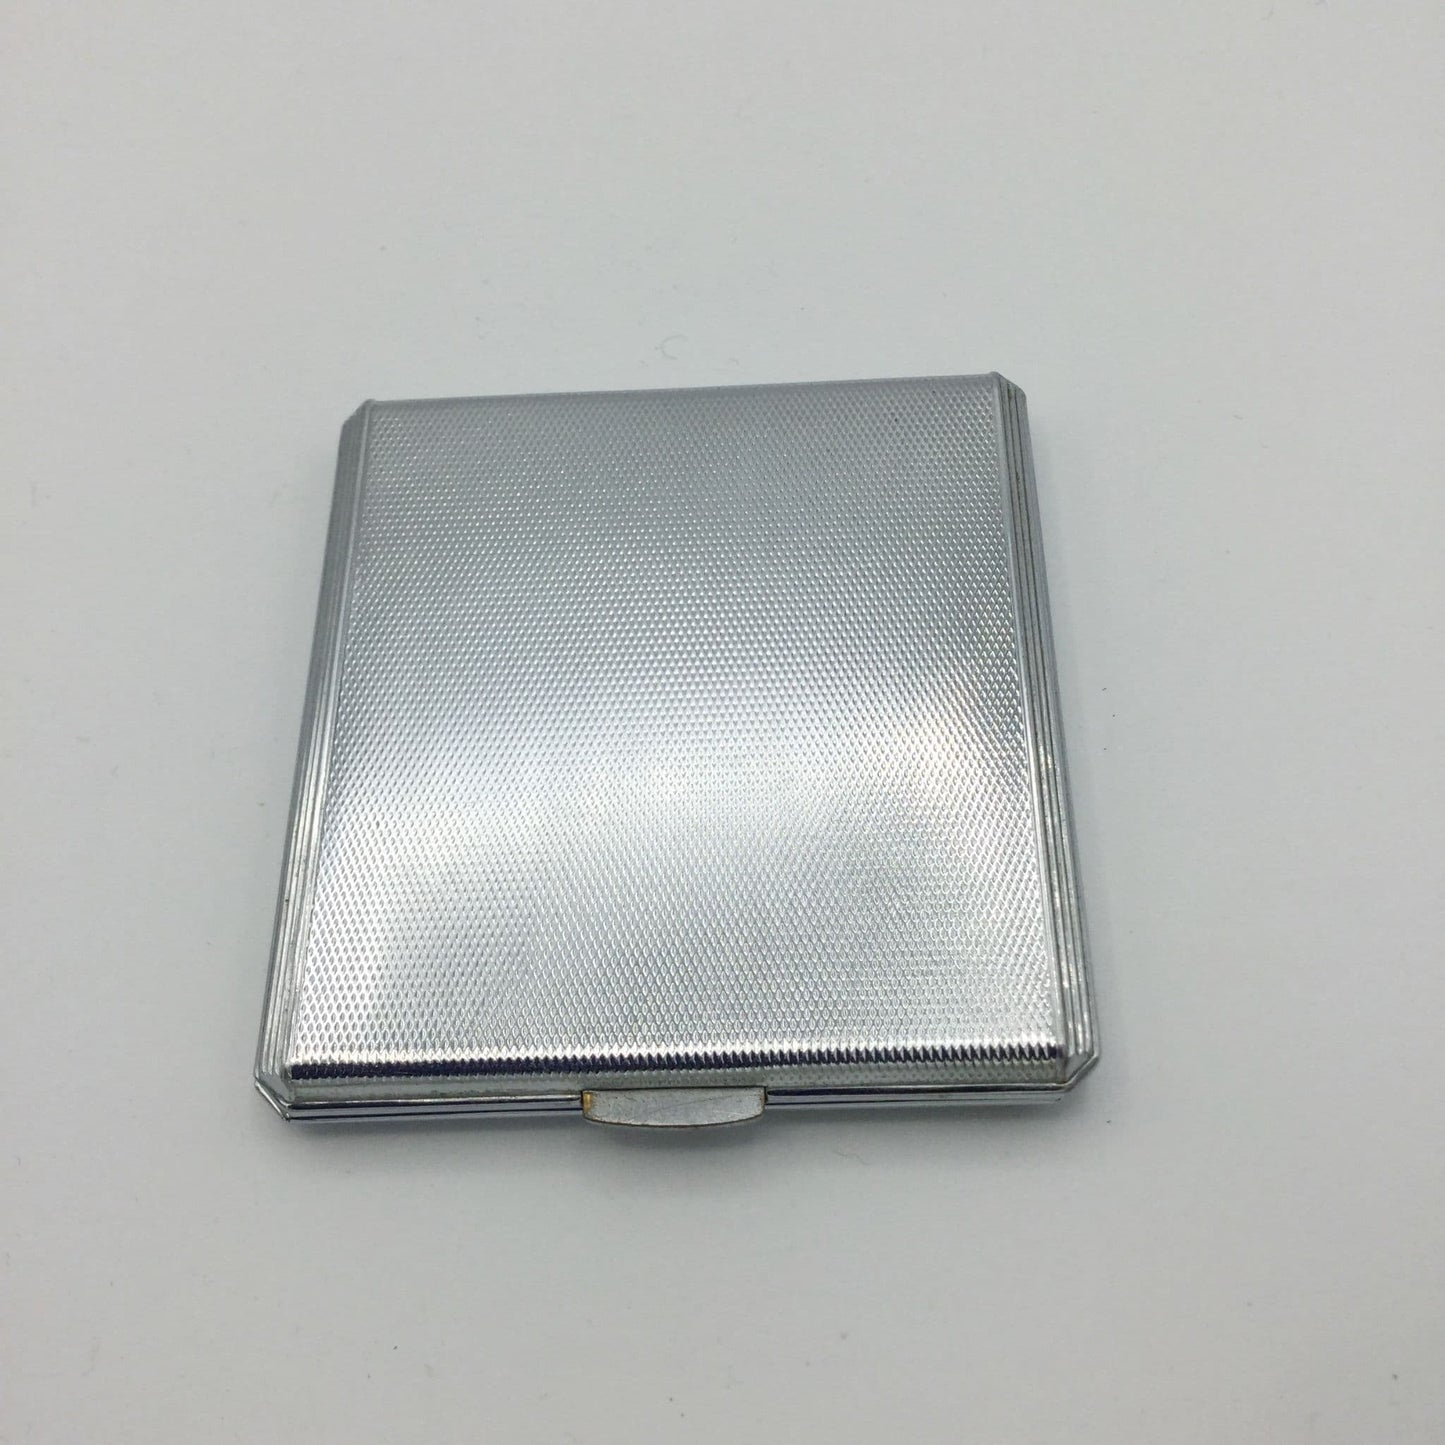 Base of silver art deco powder compact on a white background